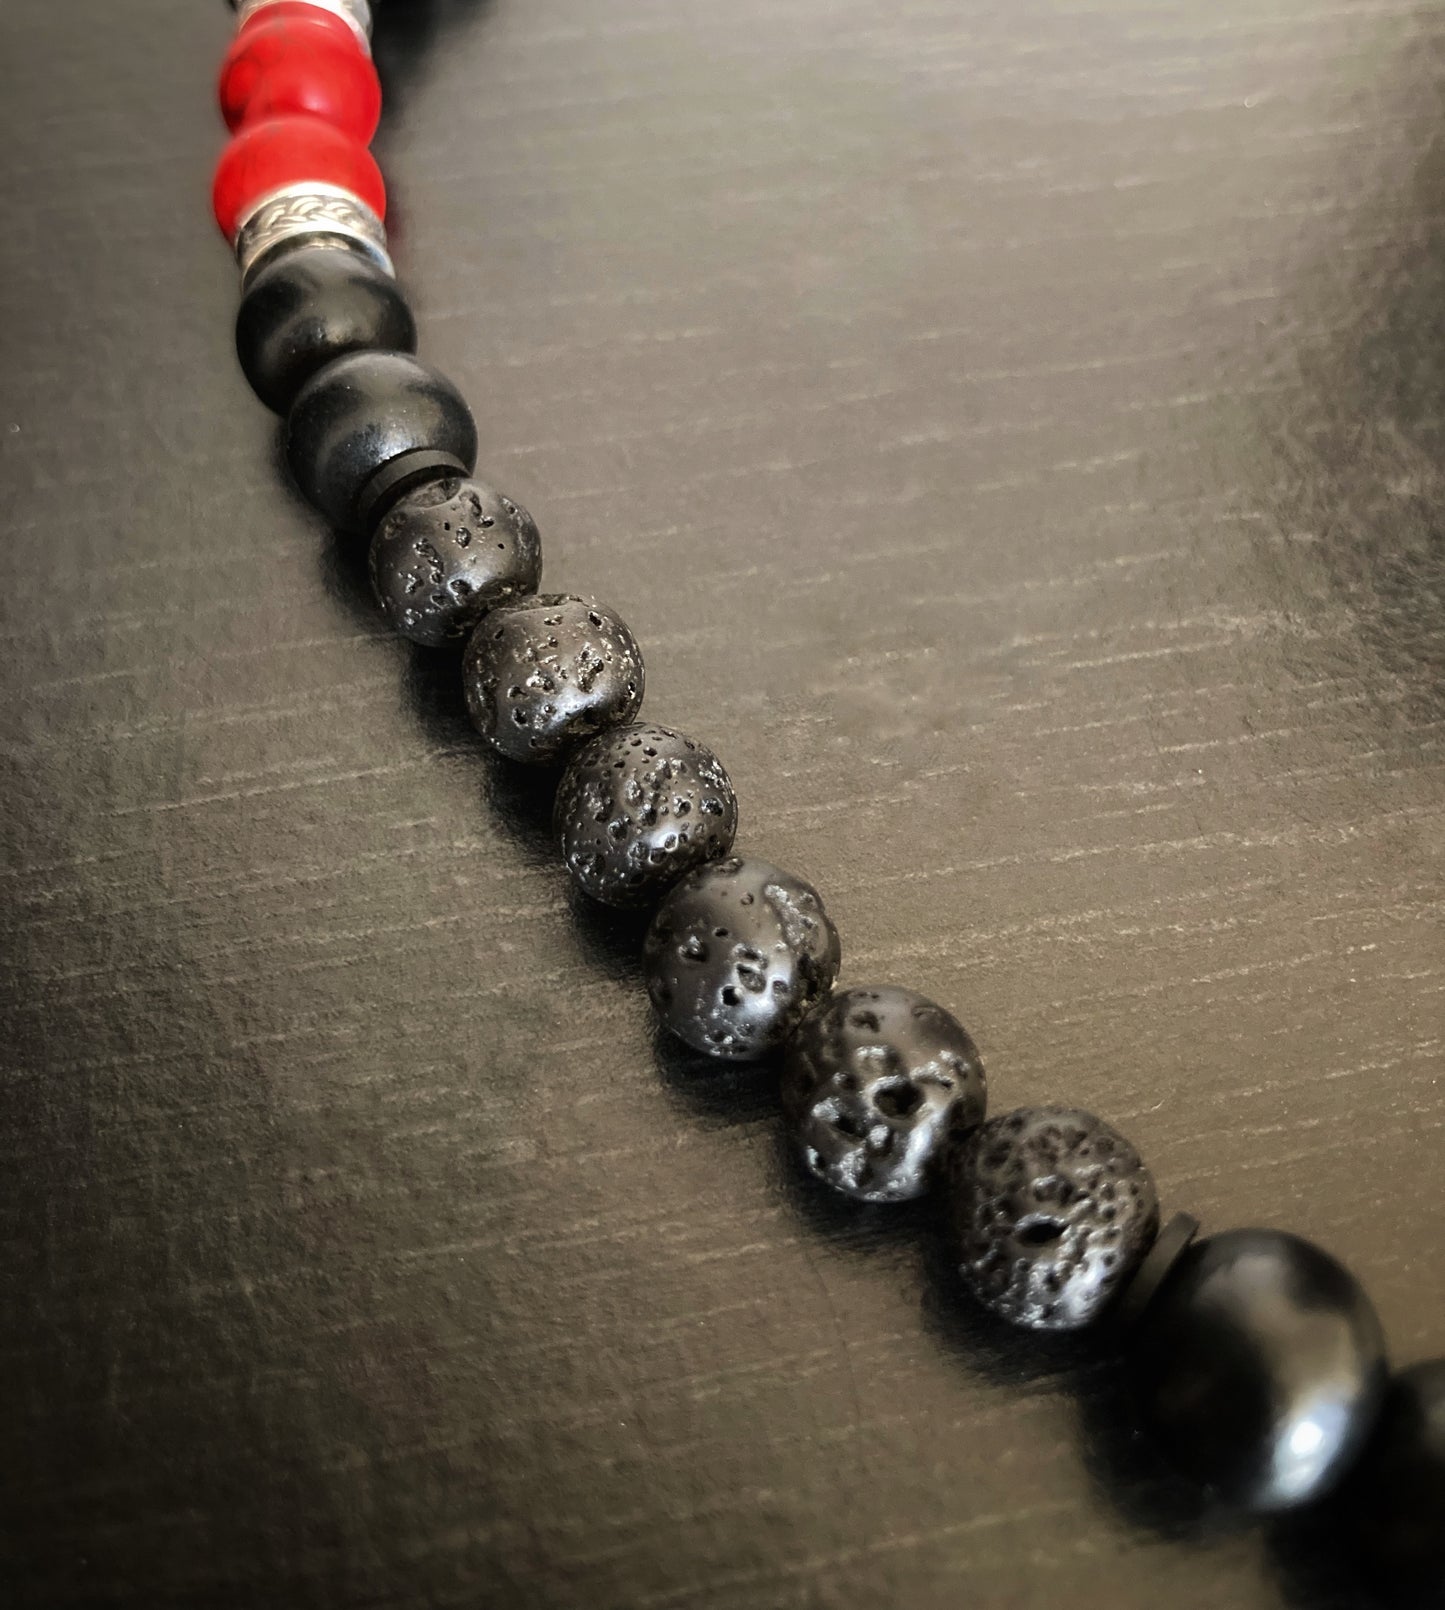 A close up of a section of a necklace that shows black lava style beads next to black wooden beads. The lava beads look more textured and are more of a matt black then the wooden ones which have a shine to them.